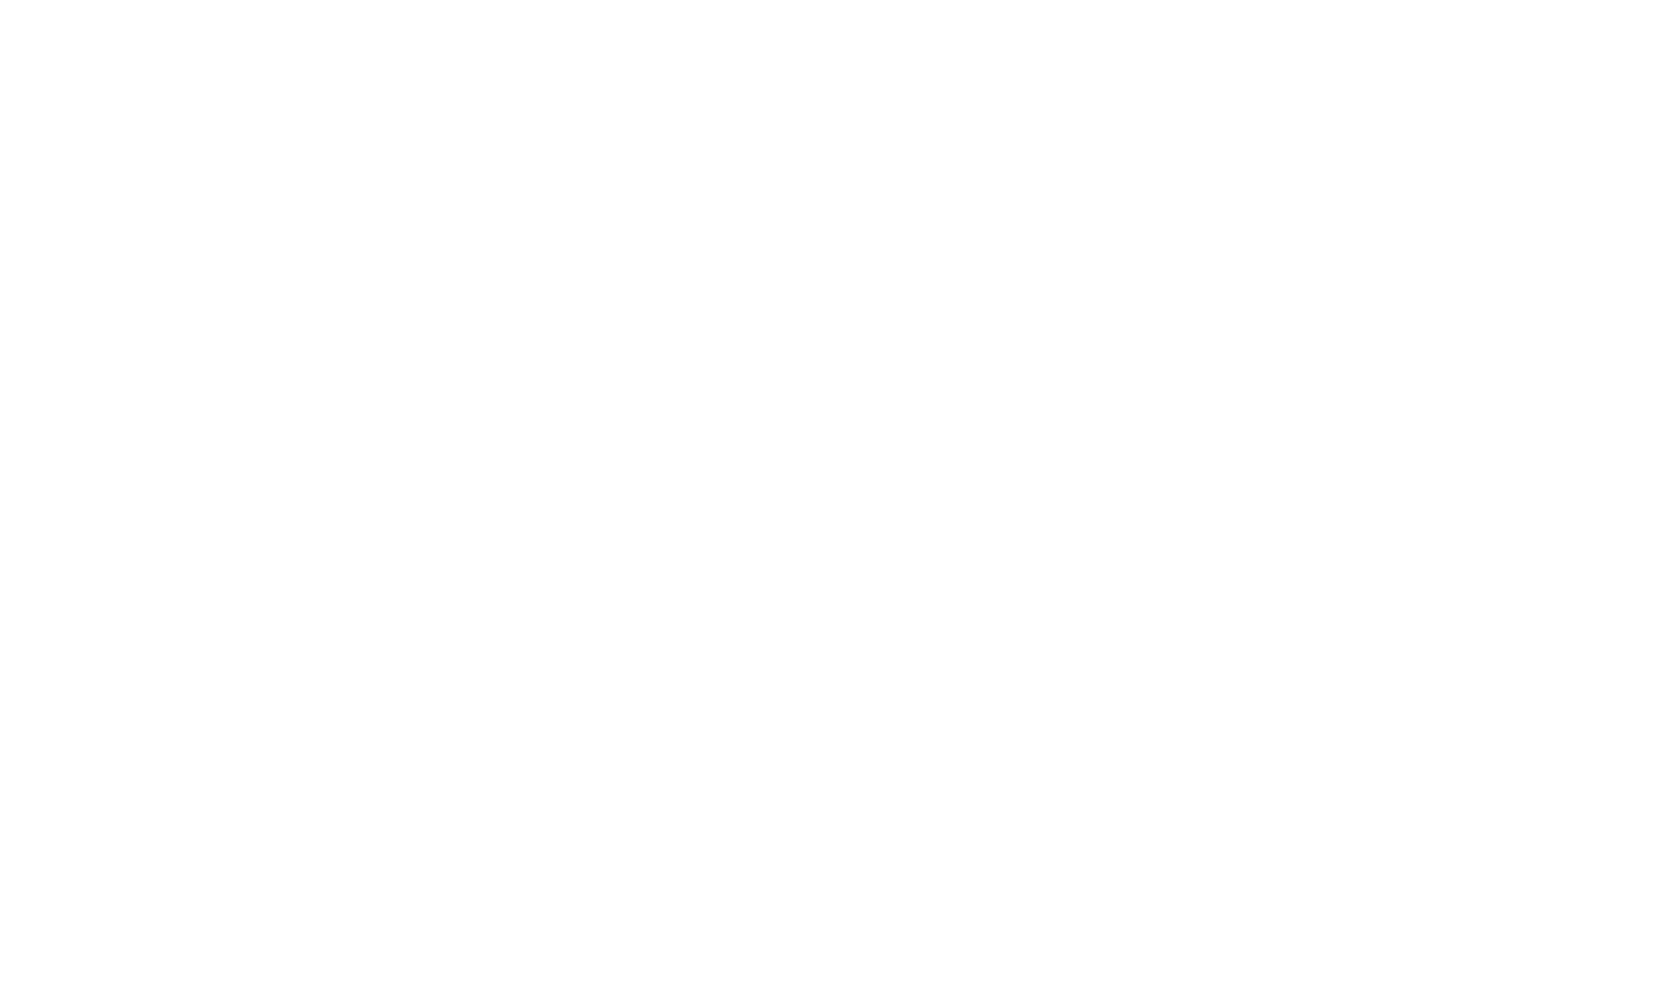 Prep'n Sell logo with the tagline 'It Pays' under a stylized house icon, indicating a focus on preparing homes for sale.